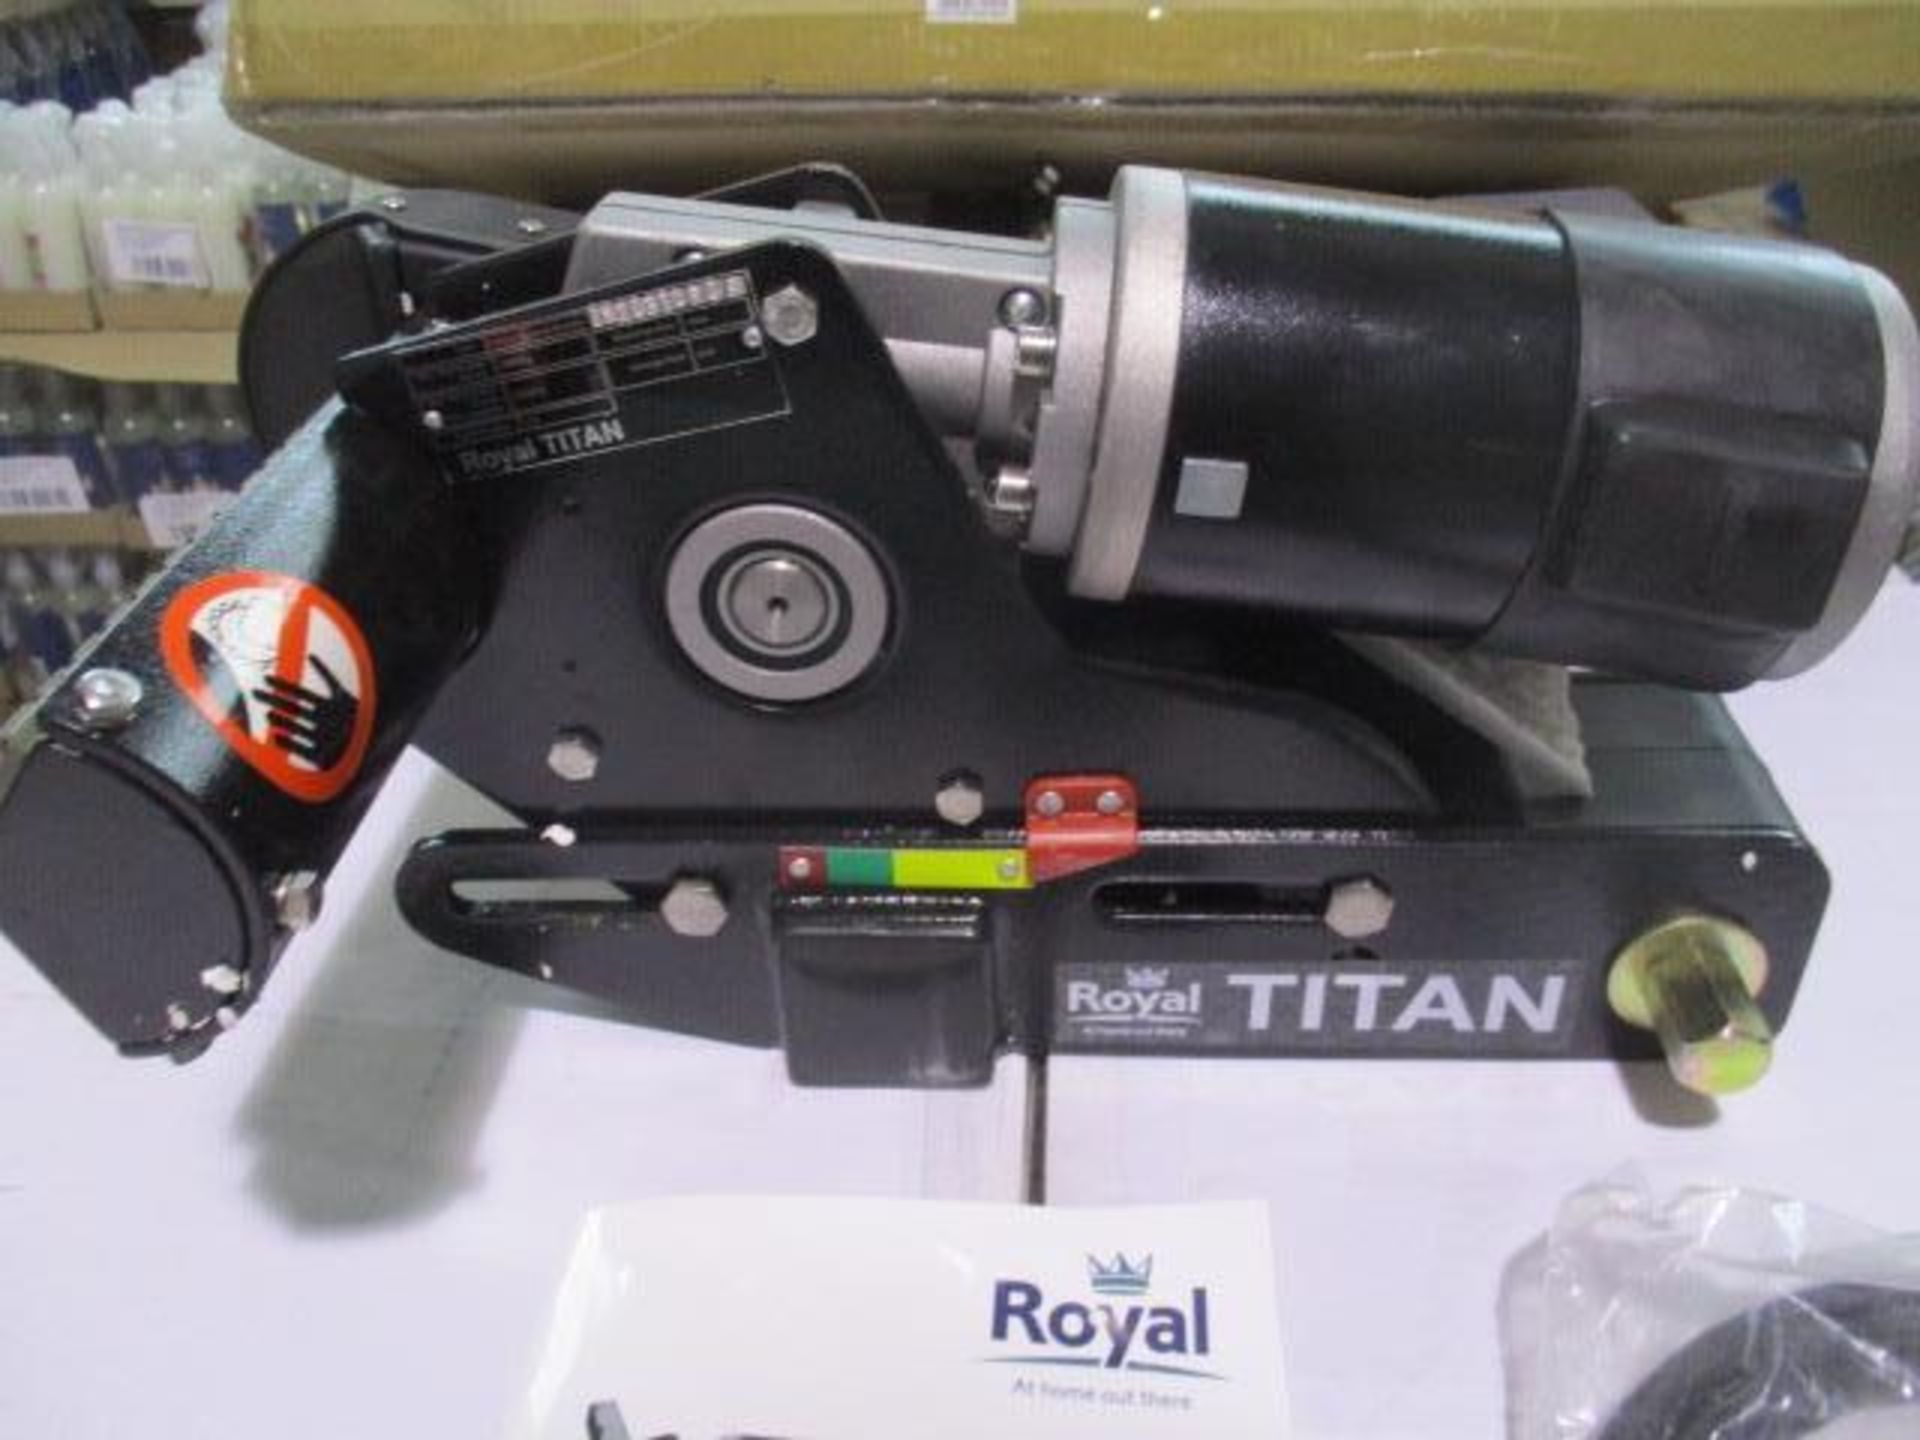 Royal Titan Caravan Mover - includes only and all items as pictured - looks unused showroom sample - - Image 2 of 4